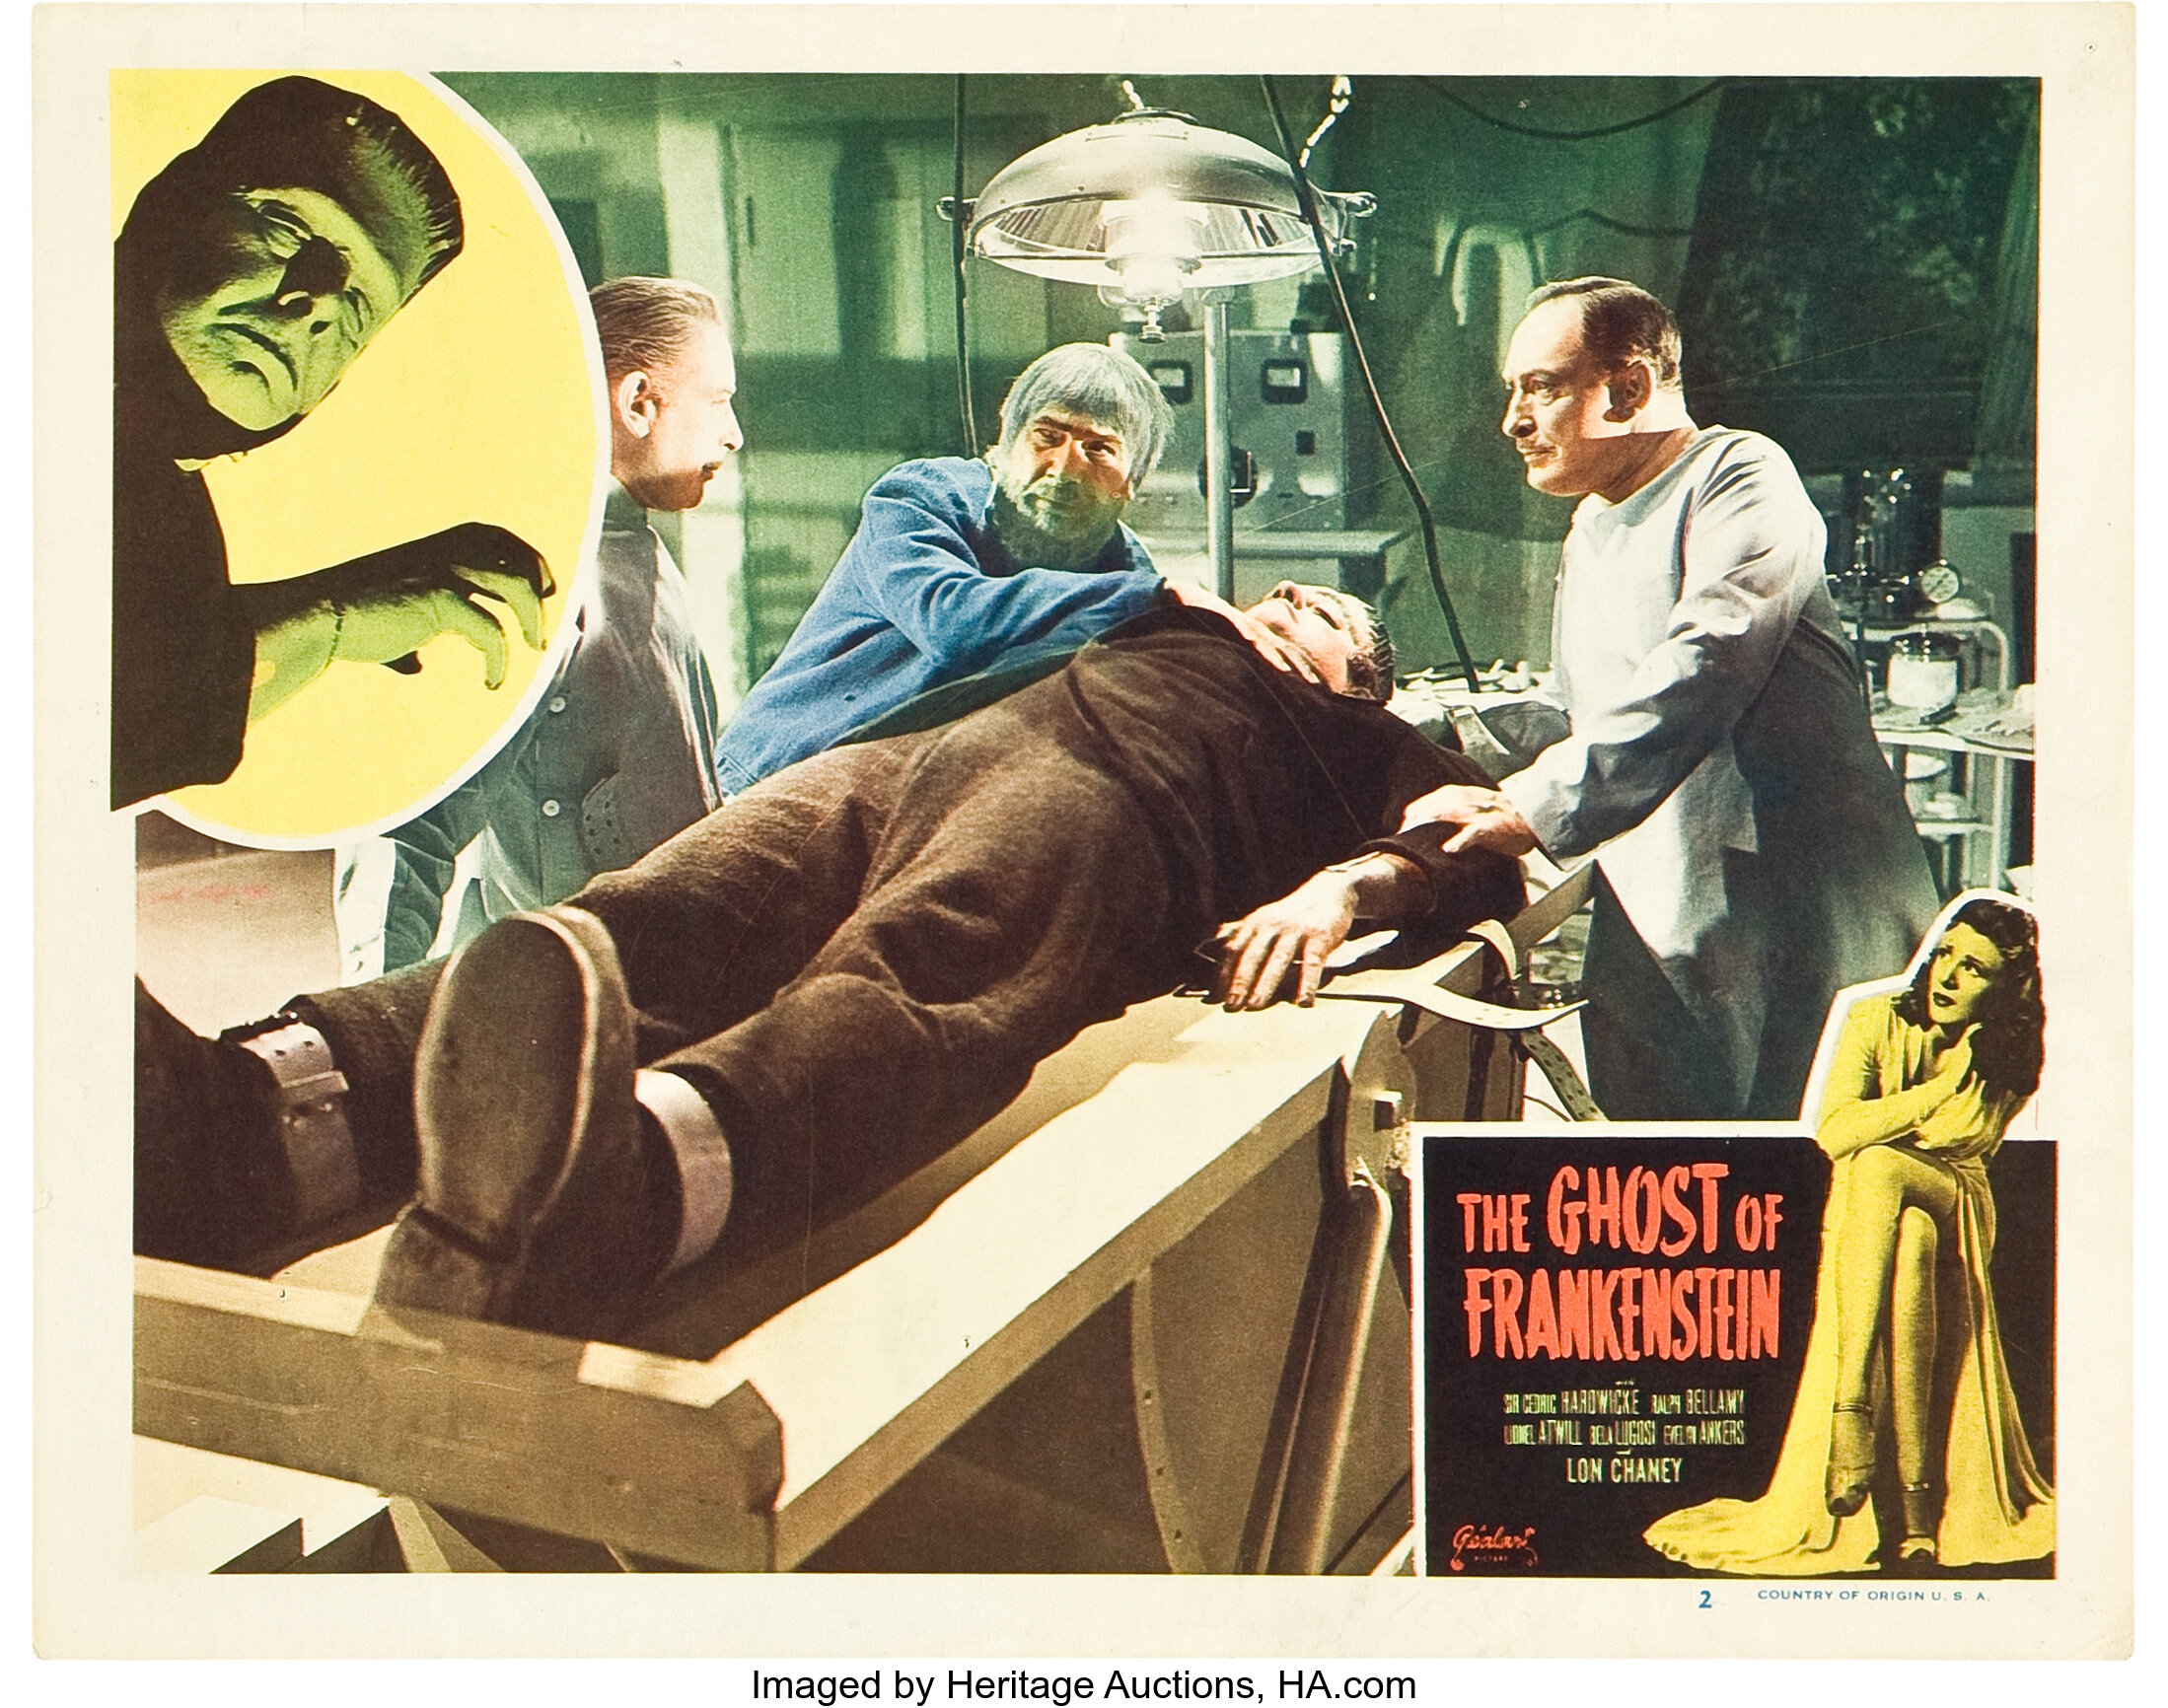 The Ghost Of Frankenstein Realart R 1948 Lobby Card 11 X Lot 595 Heritage Auctions